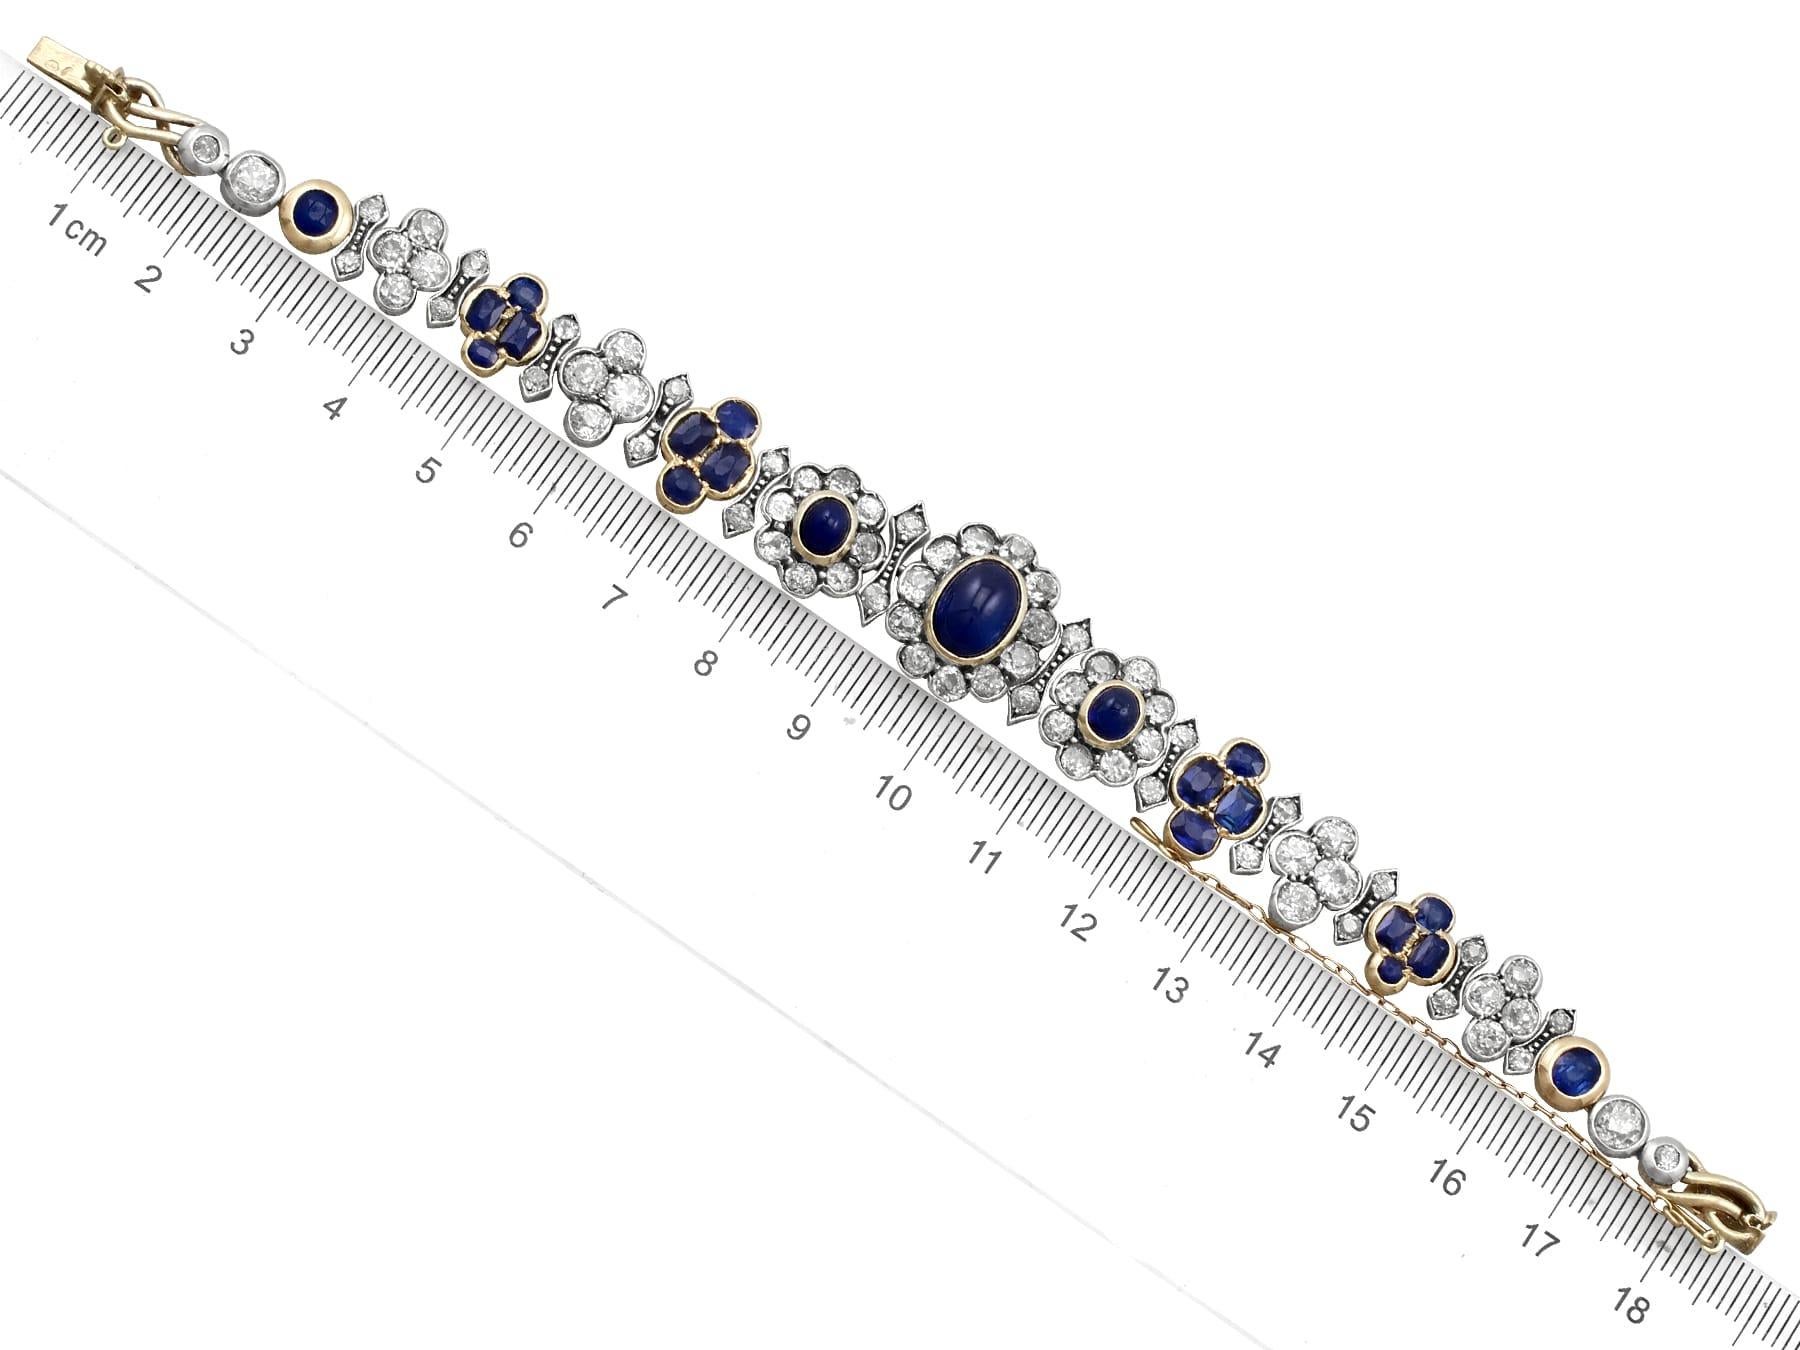 Antique 1910s French 6.72ct Cabochon Cut Sapphire and 7.15ct Diamond Bracelet In Excellent Condition For Sale In Jesmond, Newcastle Upon Tyne